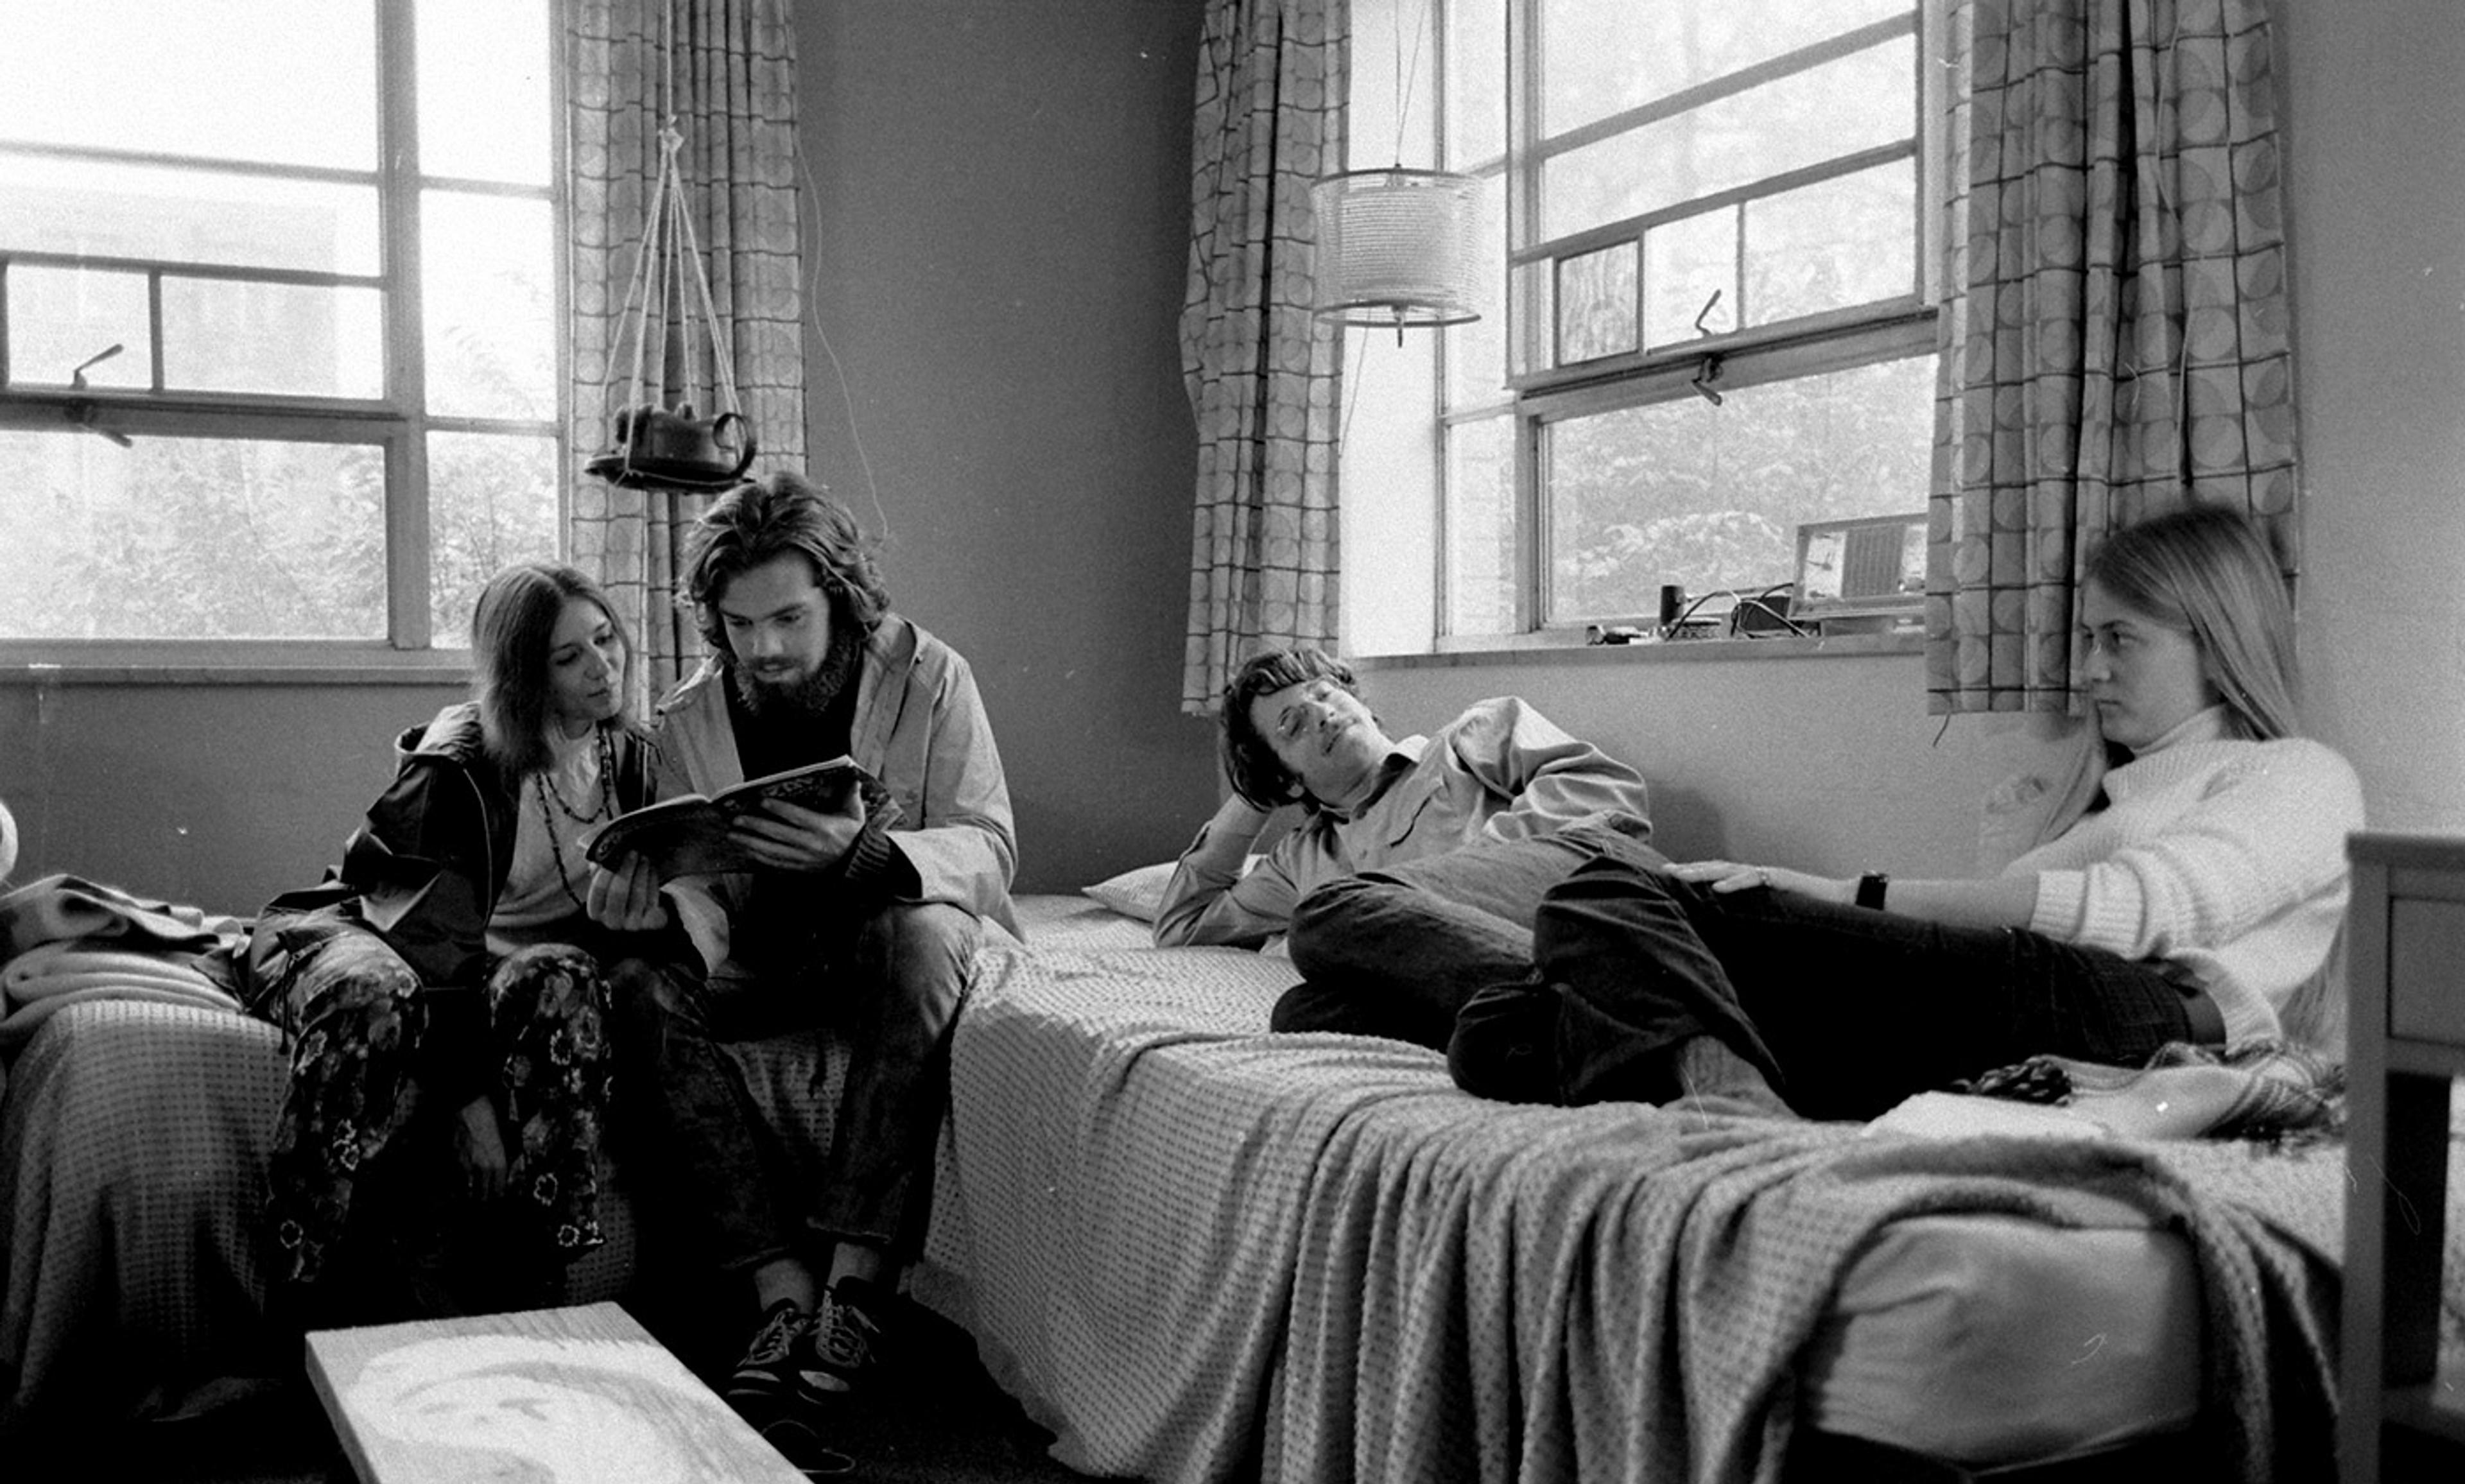 <p>Co-ed dorm at Oberlin college, 1970. <em>Photo by Bill Ray/Time Life/Getty</em></p>